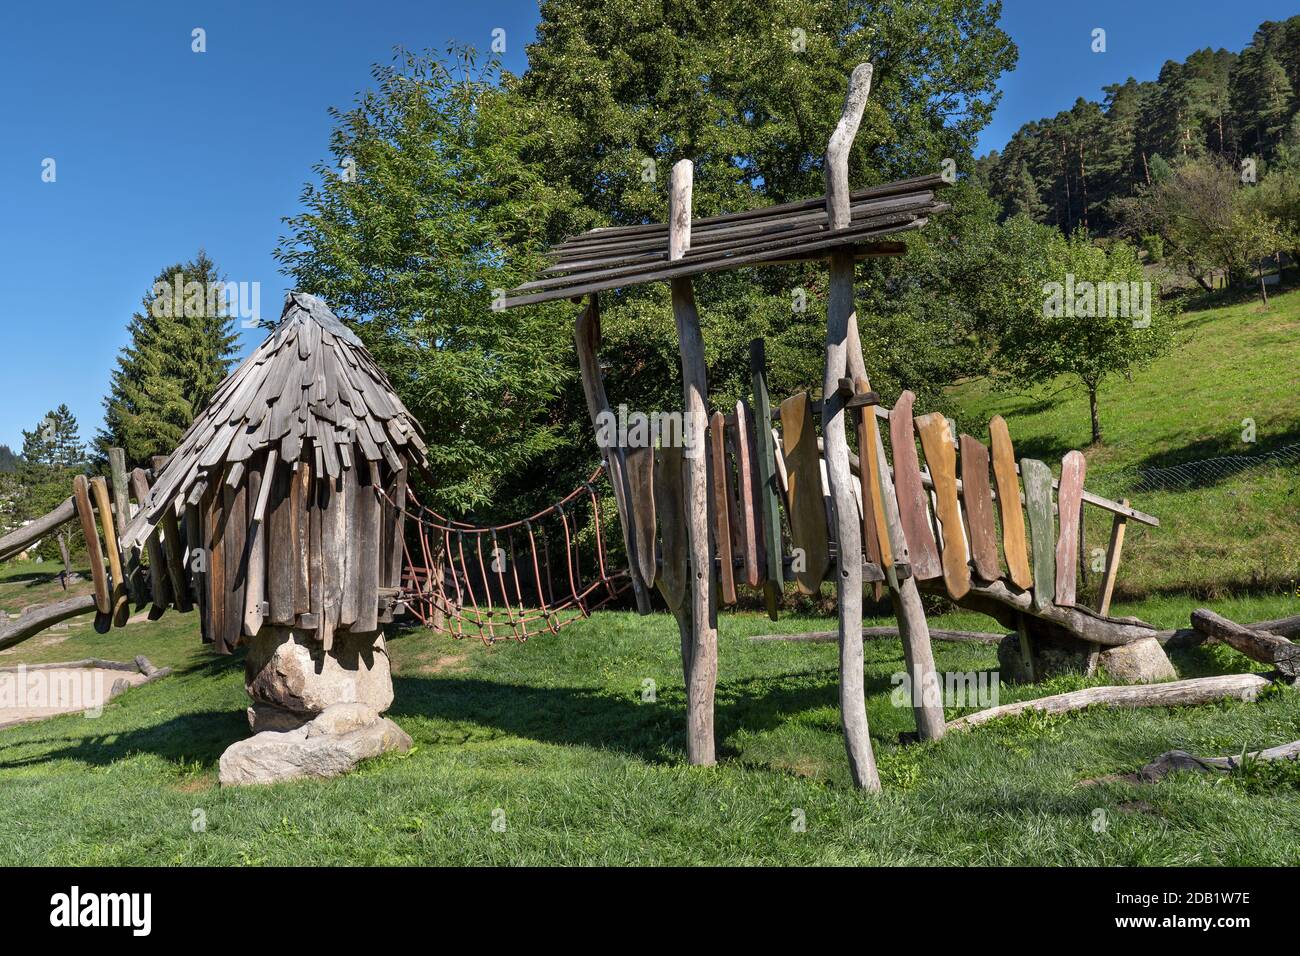 Playground with imaginative wooden play equipment Stock Photo